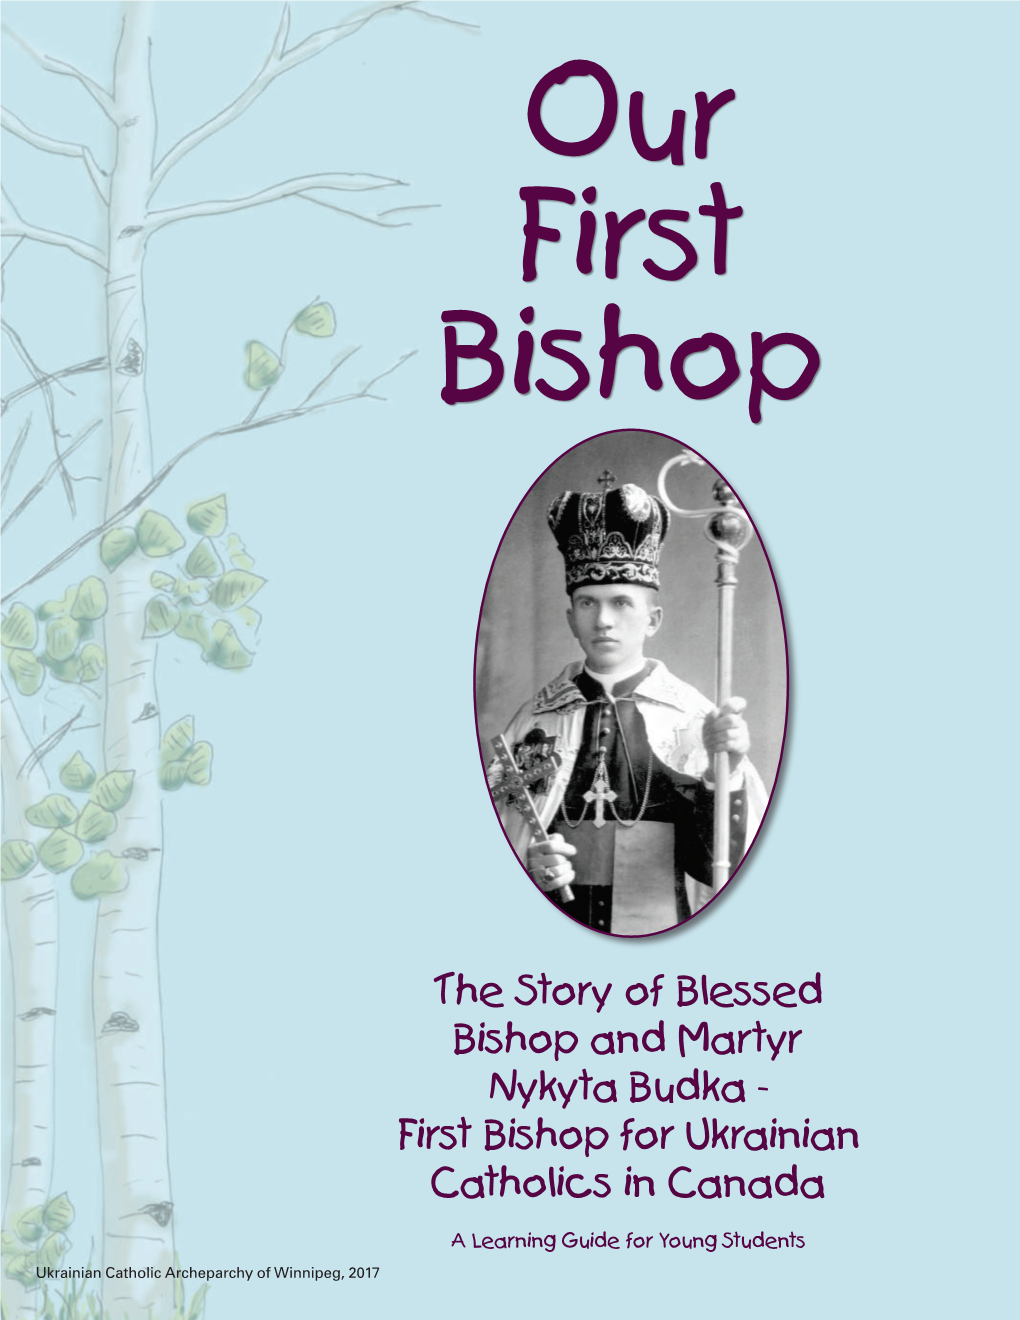 The Story of Blessed Bishop and Martyr Nykyta Budka - First Bishop for Ukrainian Catholics in Canada